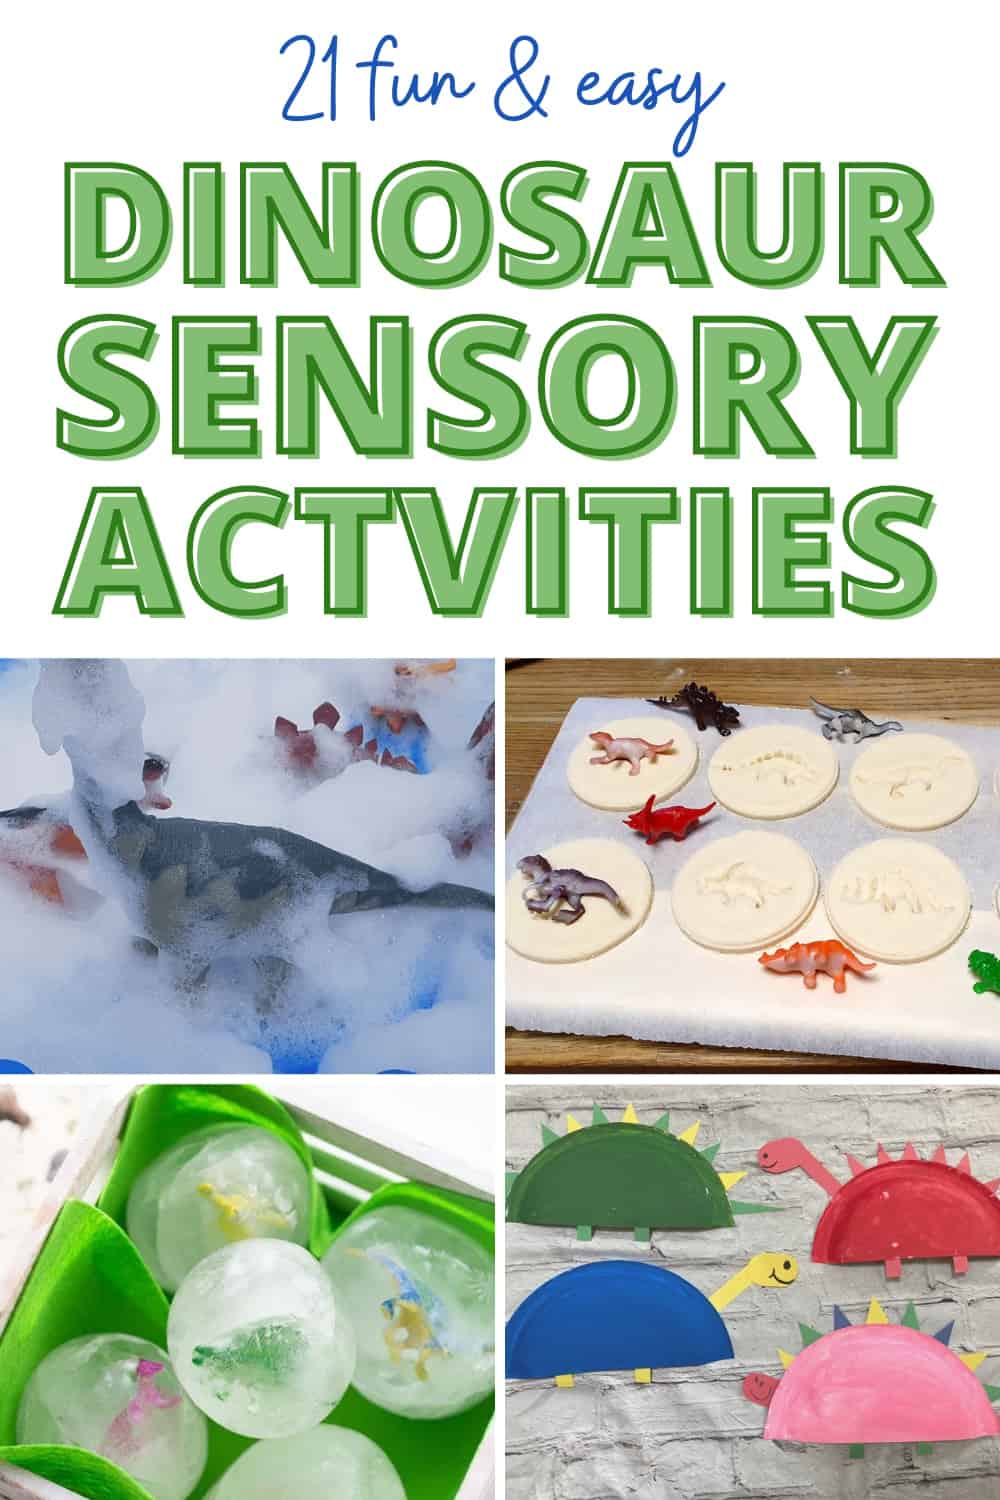 feature image for dinosaur sensory activities and bin ideas